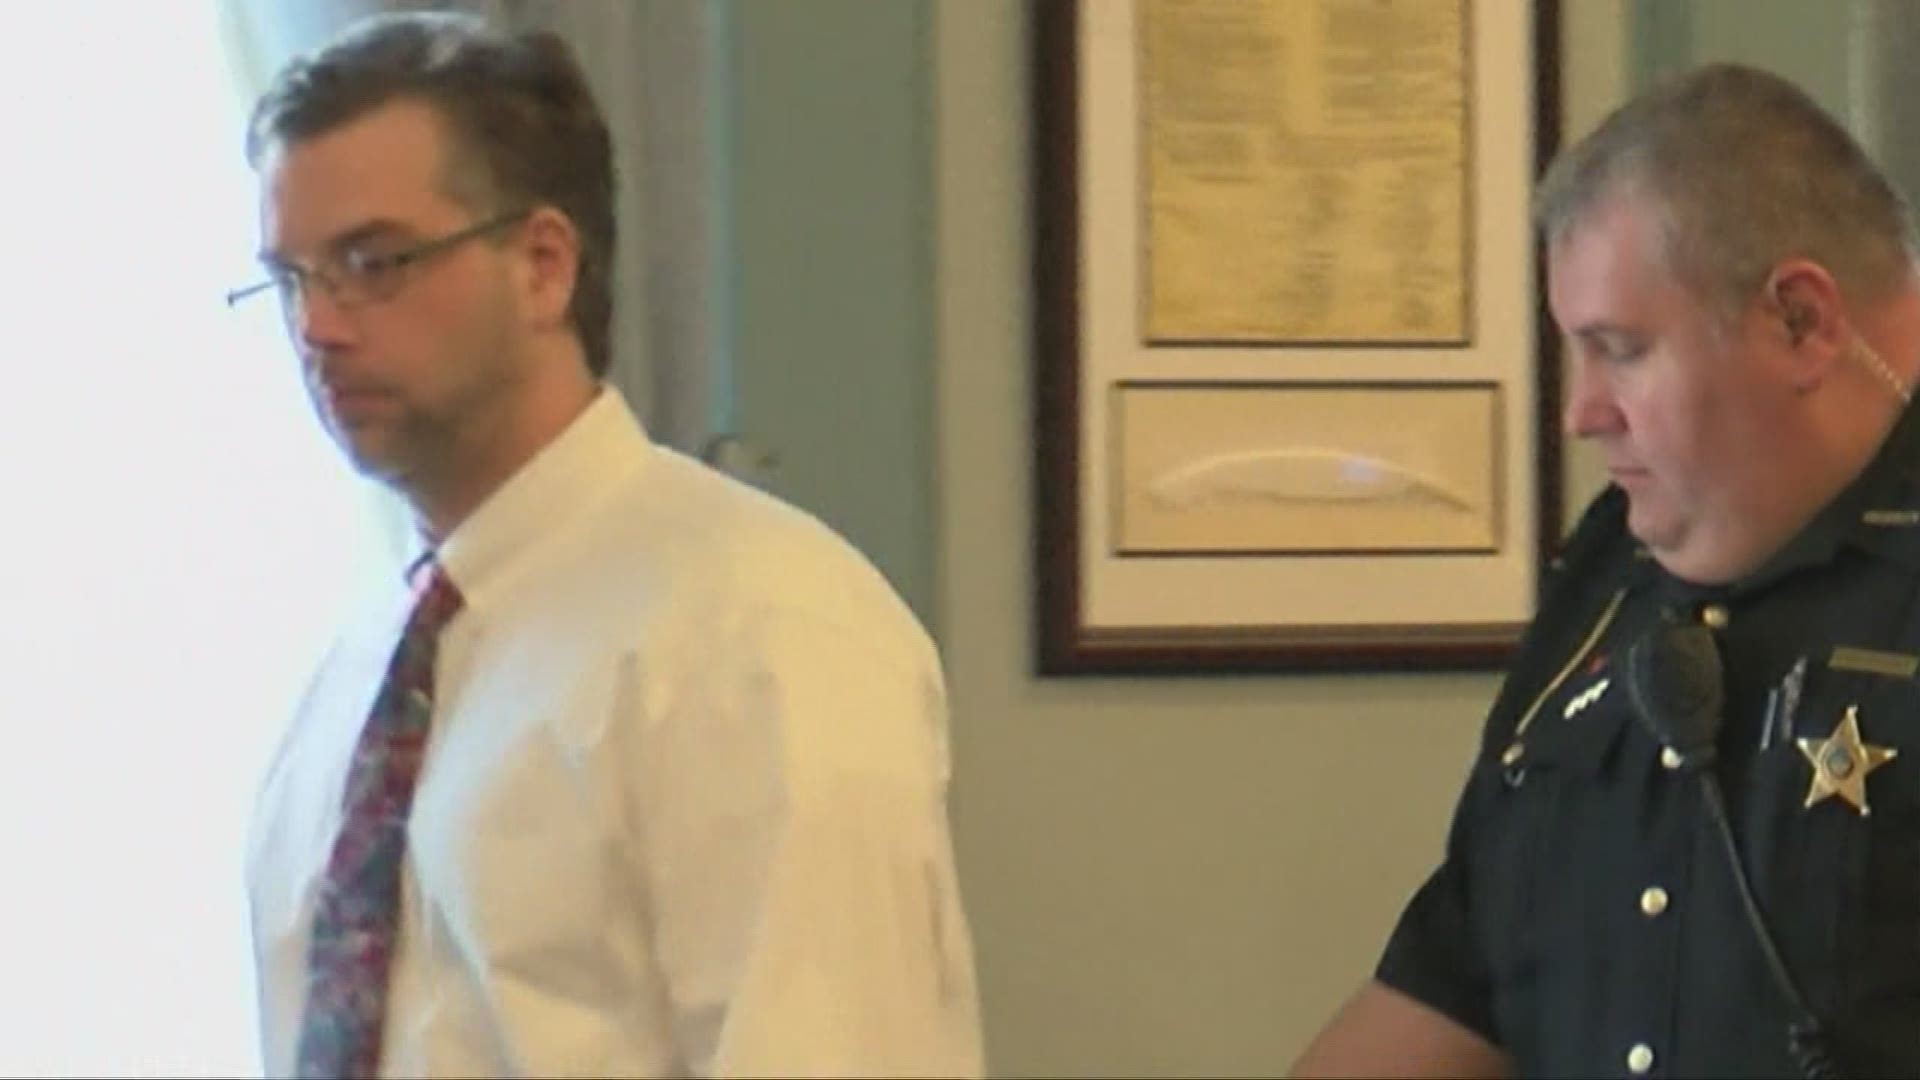 Day 3: Shawn Grate murder trial continues